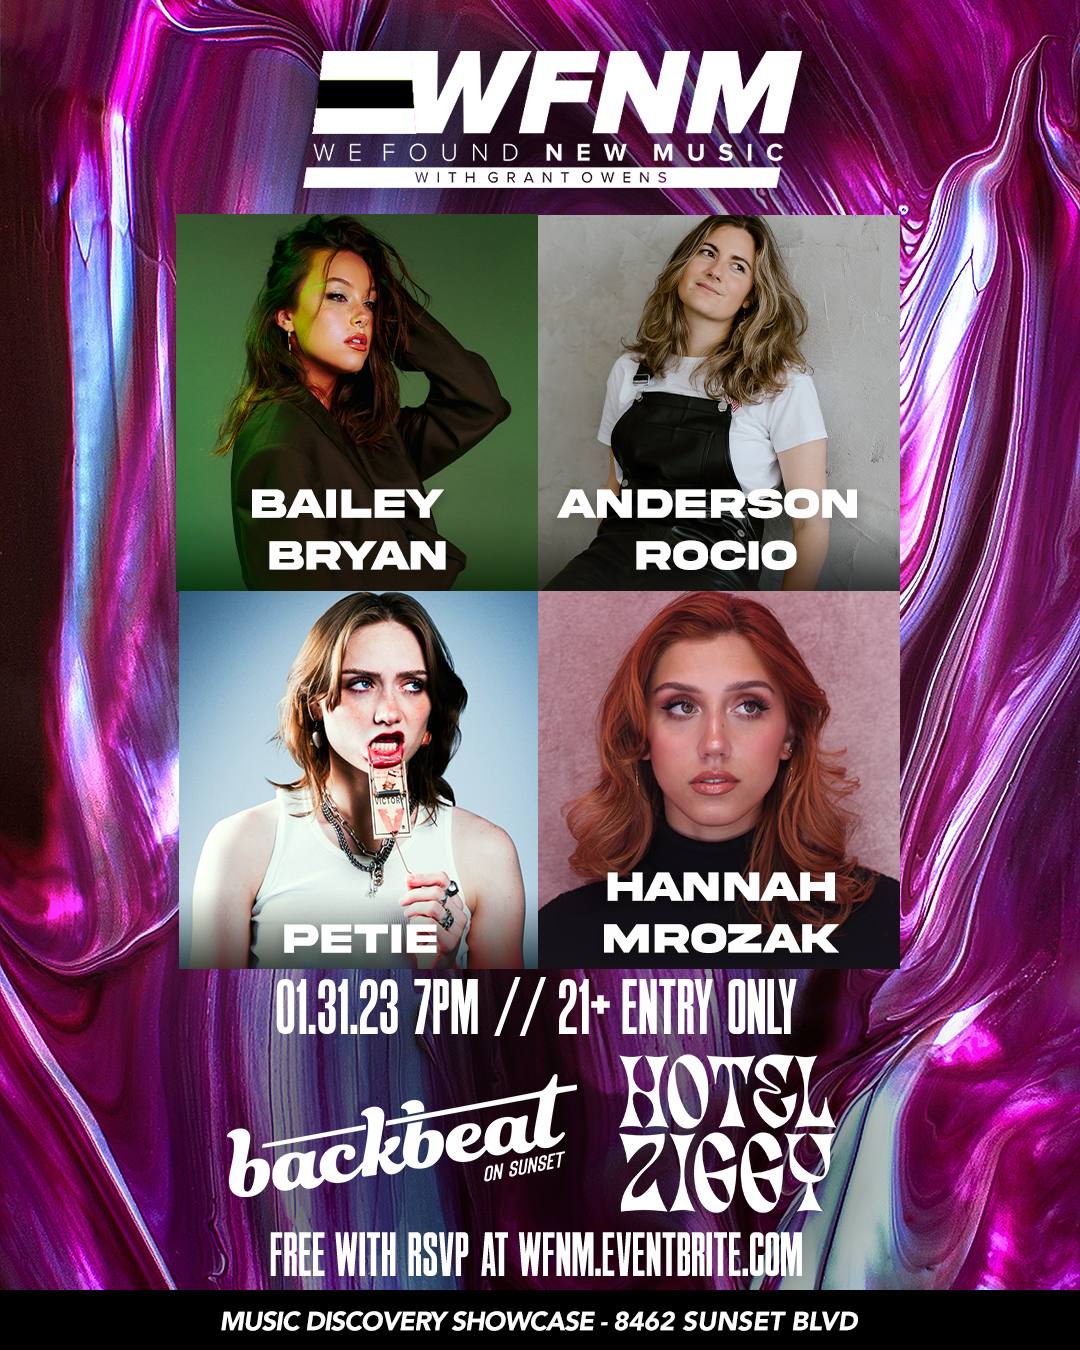 Hotel Ziggy Presents: We Found New Music with Bailey Bryan, Petie Anderson Rocio, and Hannah Mrozak 